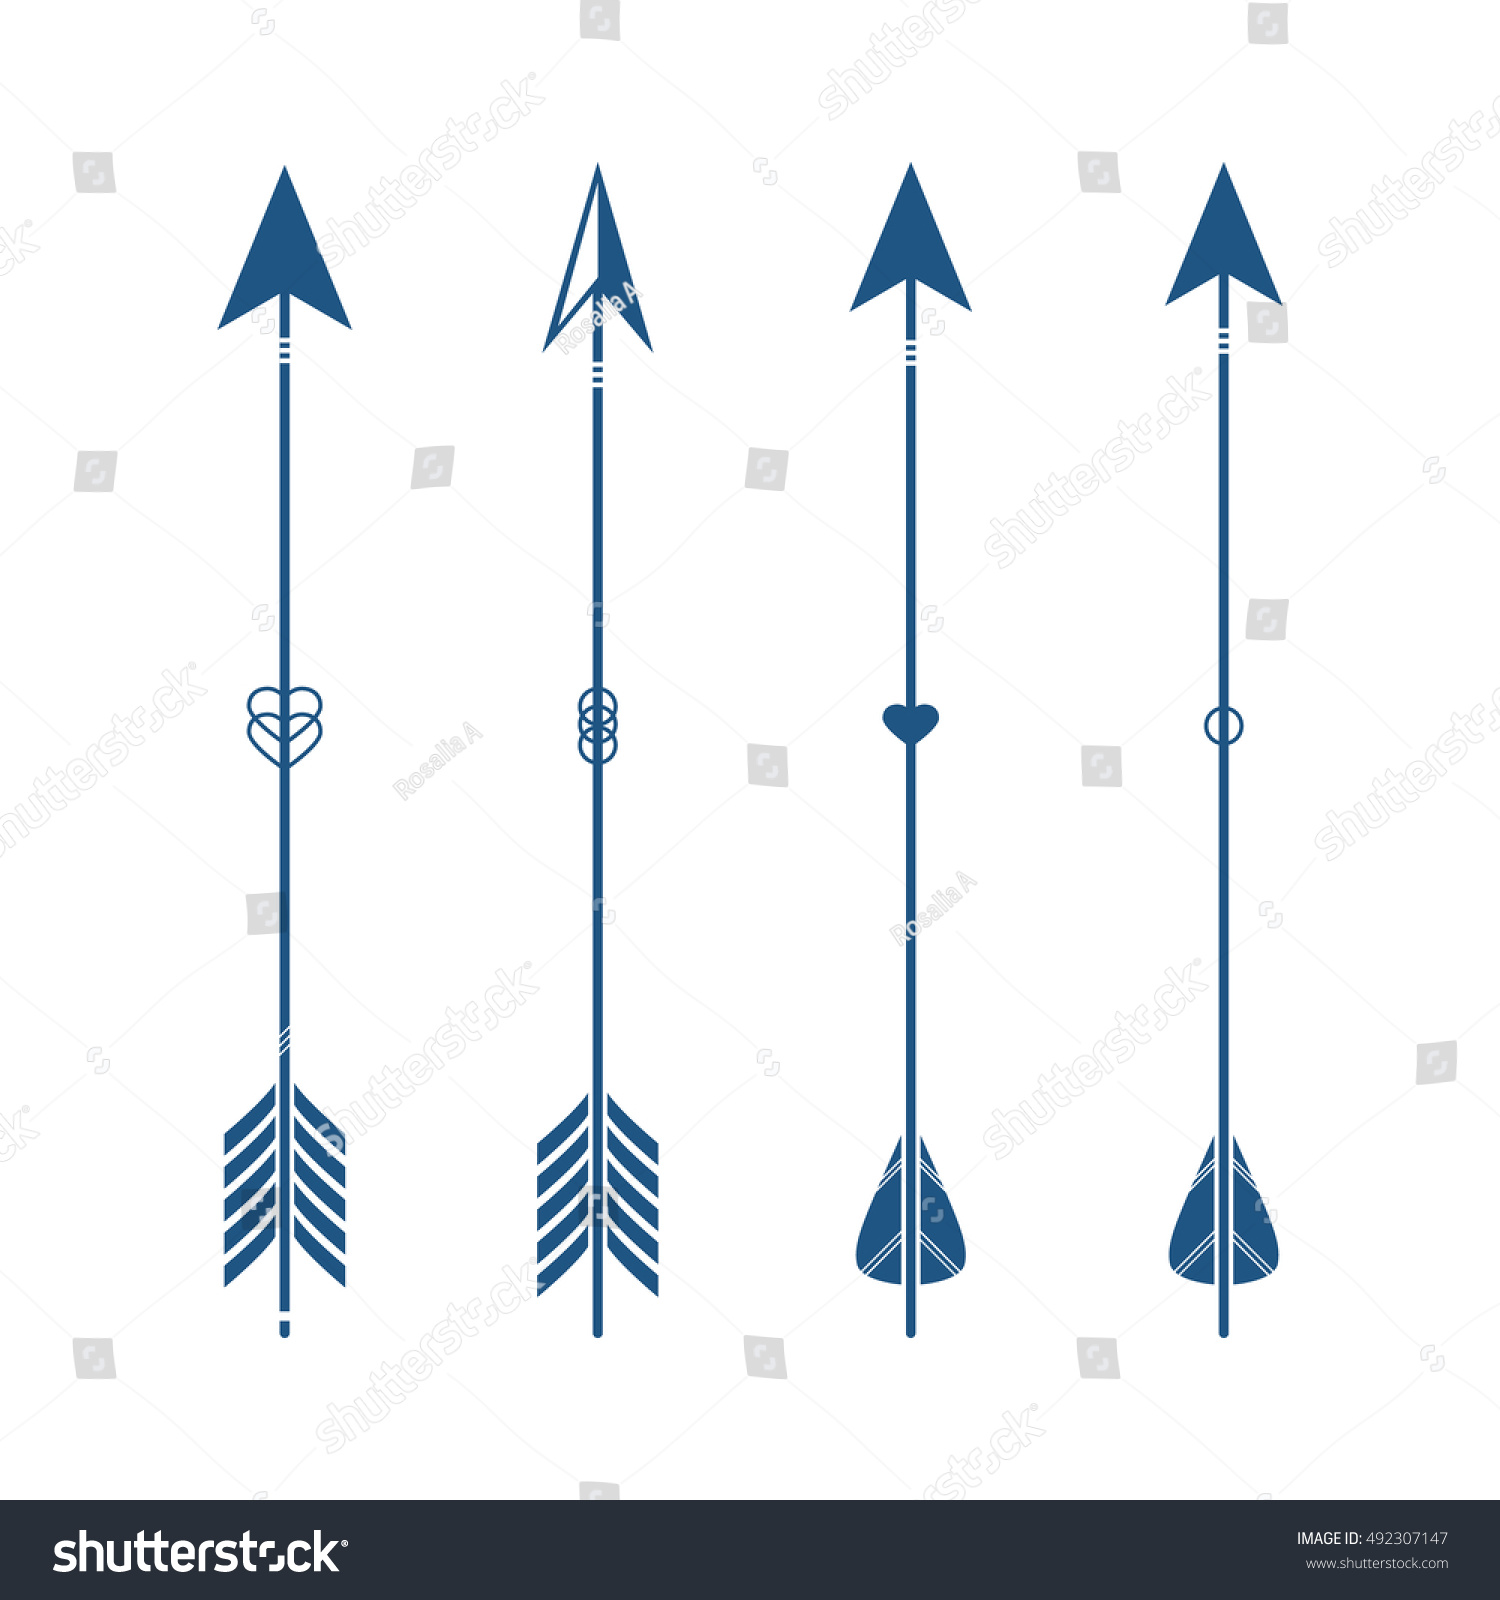 Collection of decorative tribal arrows. Hipster arrows. Indian style. Arrow clip art. Ethnic elements isolated on white background. #492307147